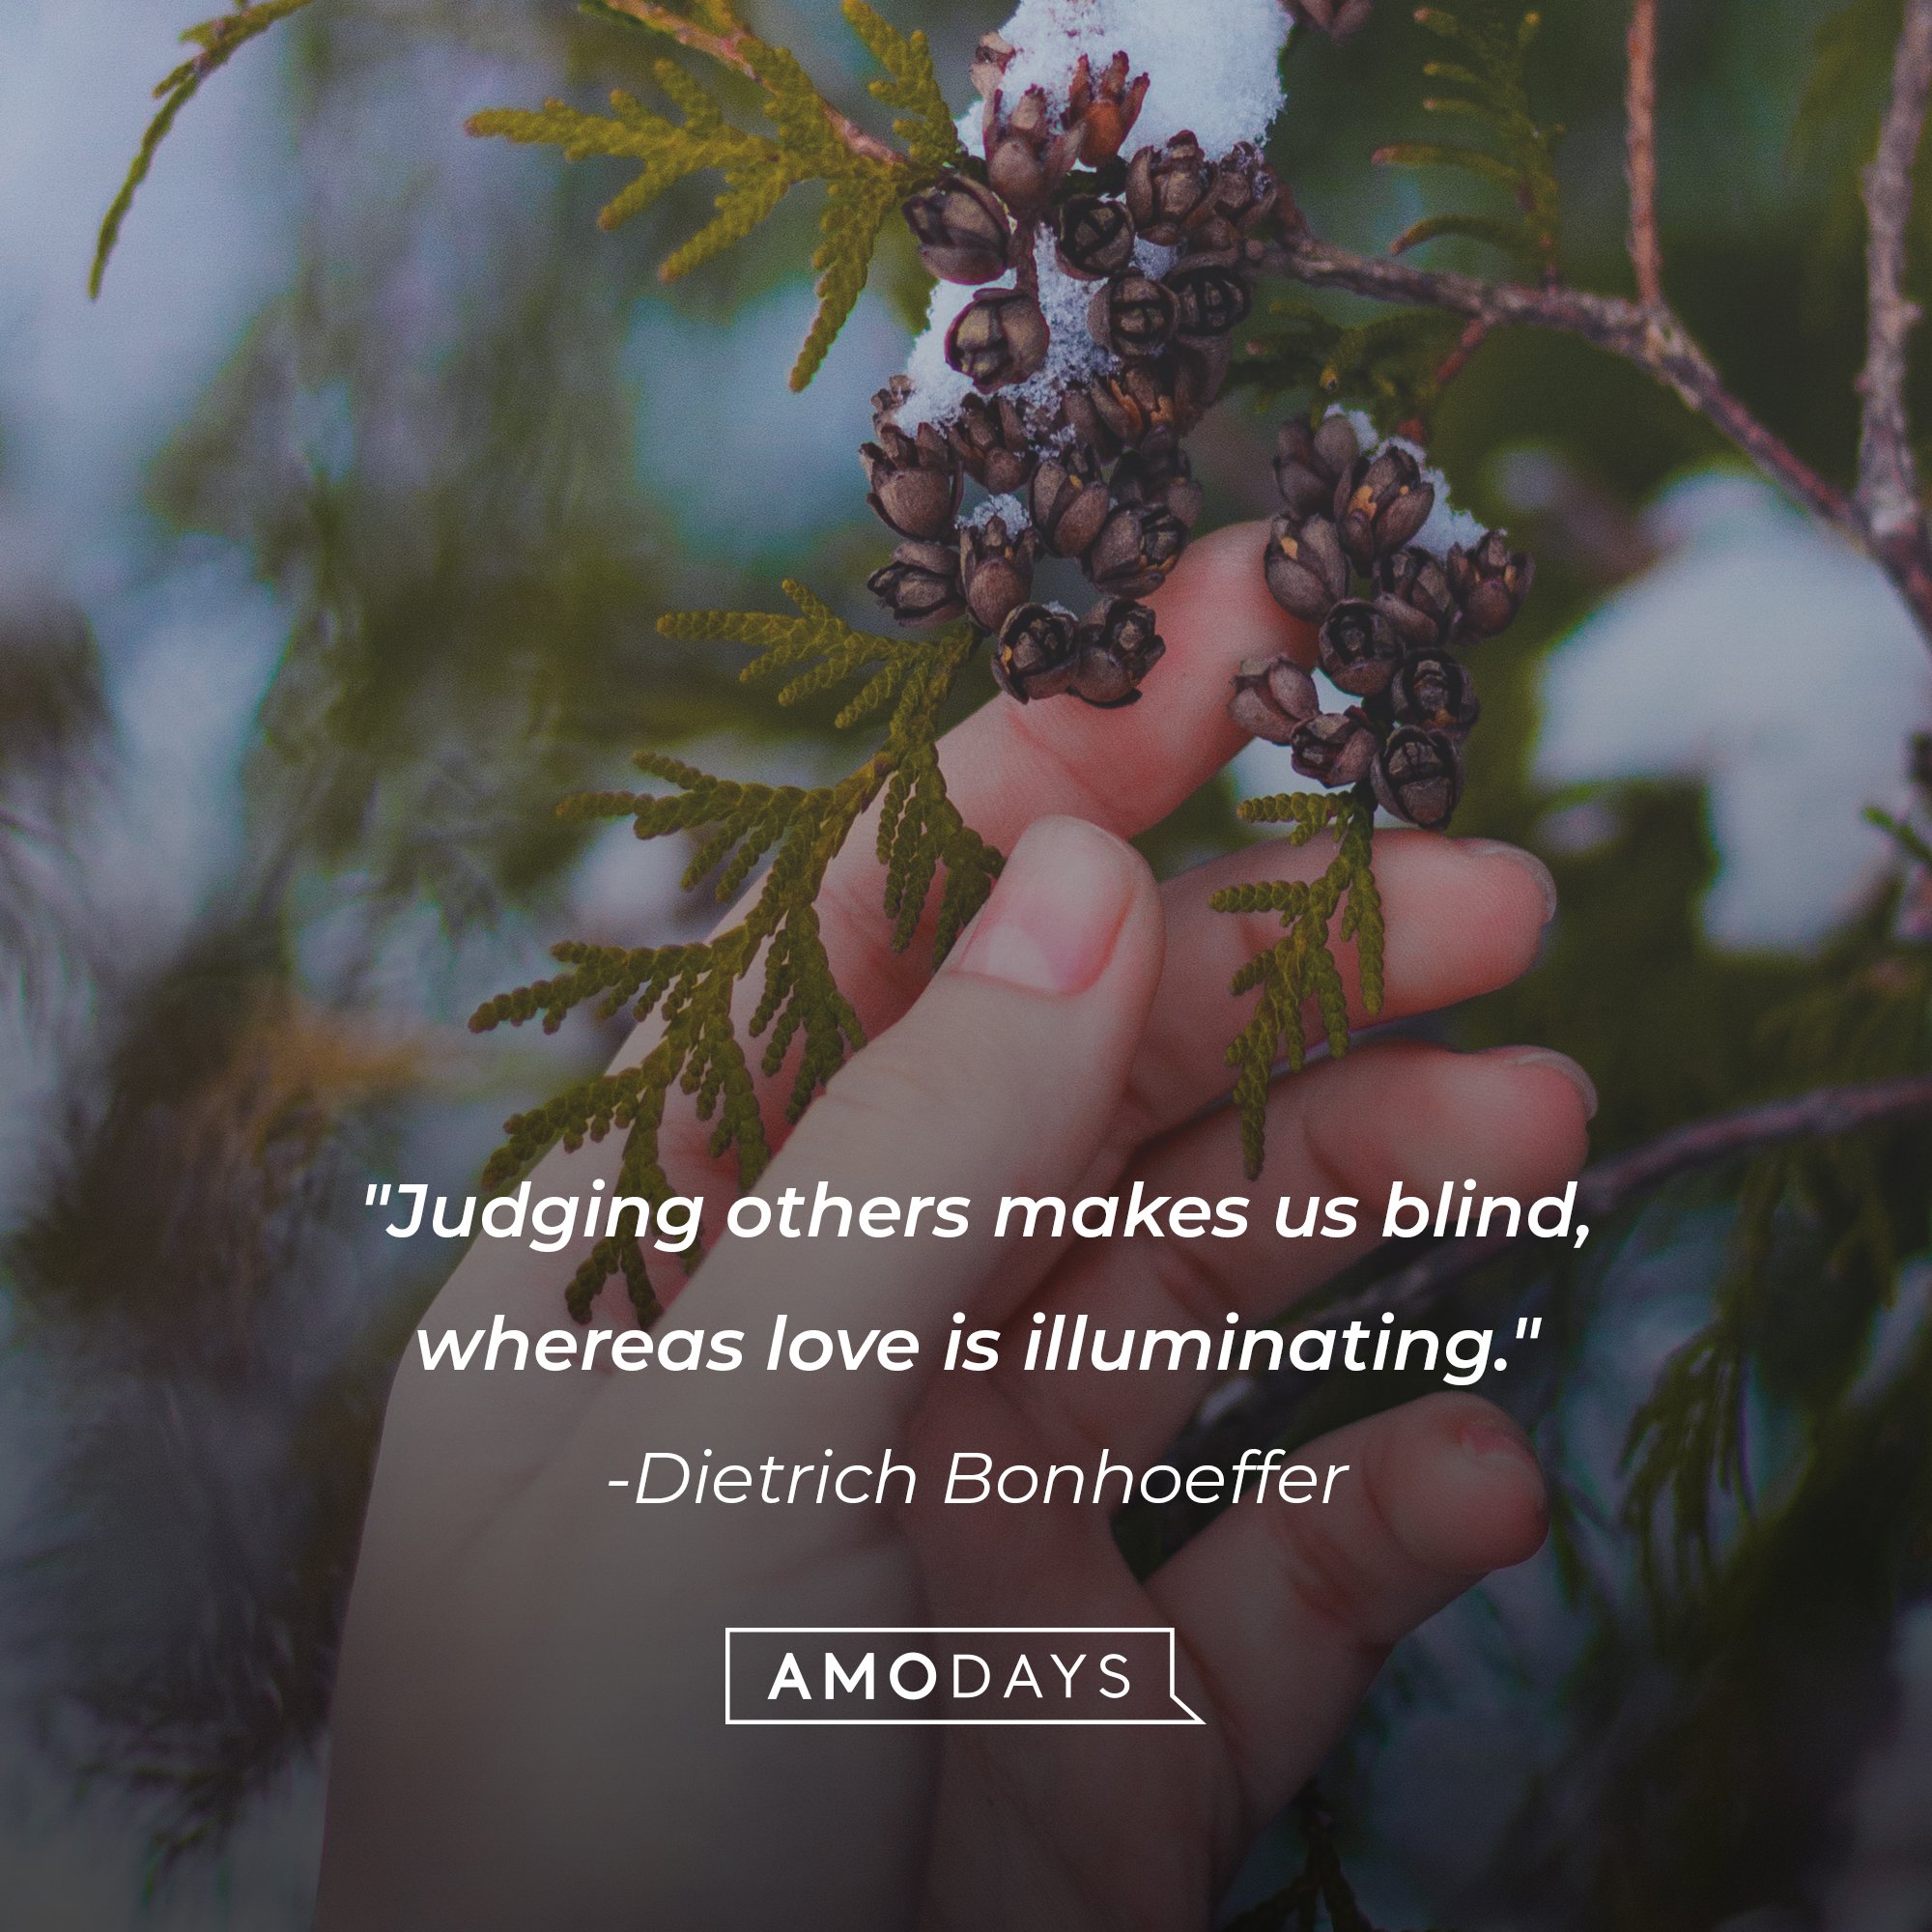 Dietrich Bonhoeffer’s quote: "Judging others makes us blind, whereas love is illuminating." | Image: AmoDays  